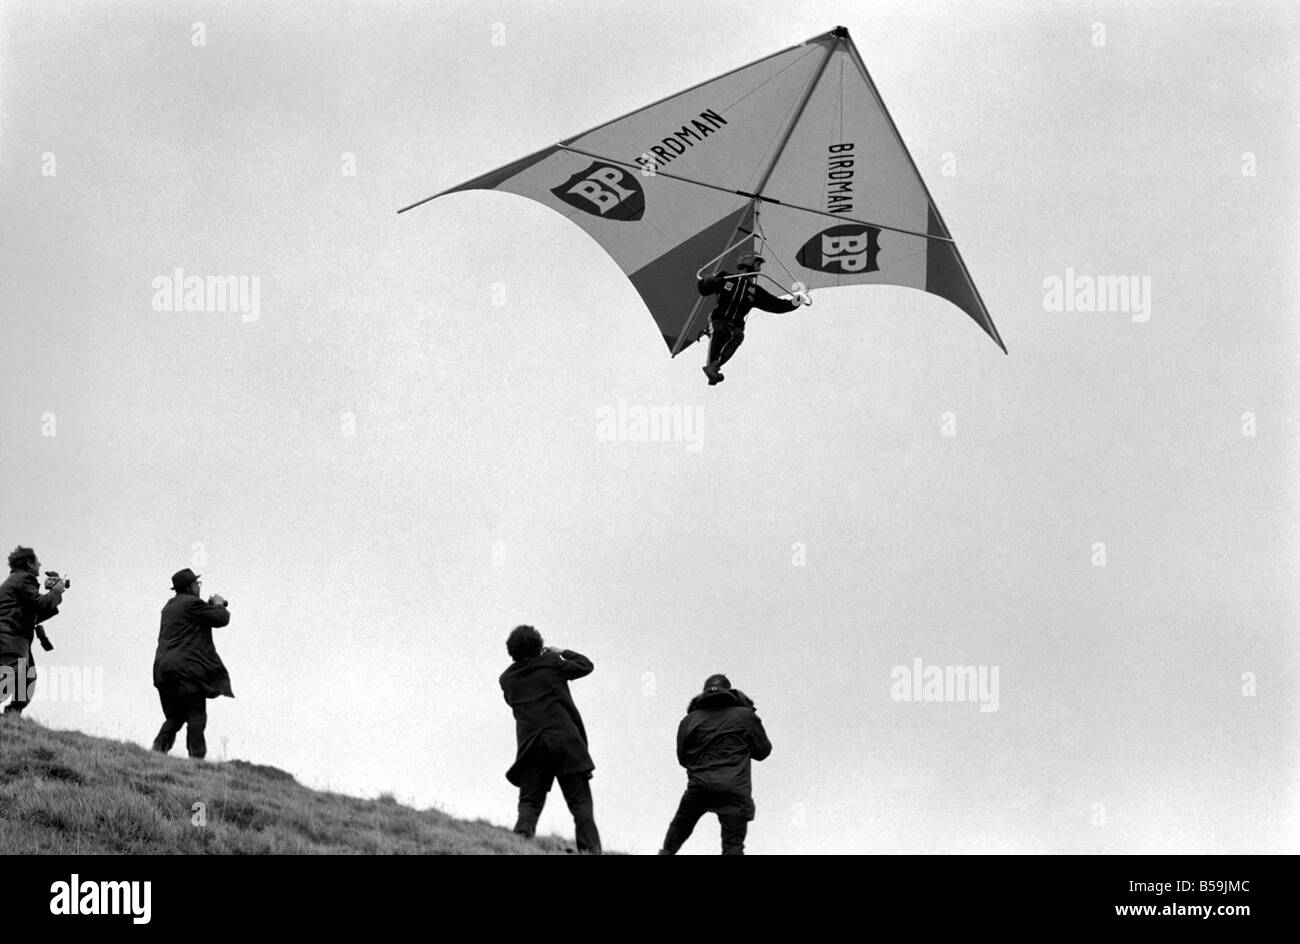 British Kite Team. With the World Hang Gliding Championships taking place in Australia next week, British Team sponsored by B.P. were having last minute get-together this afternoon (Friday) at Marlborough Downs, Wiltshire. March 1975 75-01306-004 Stock Photo